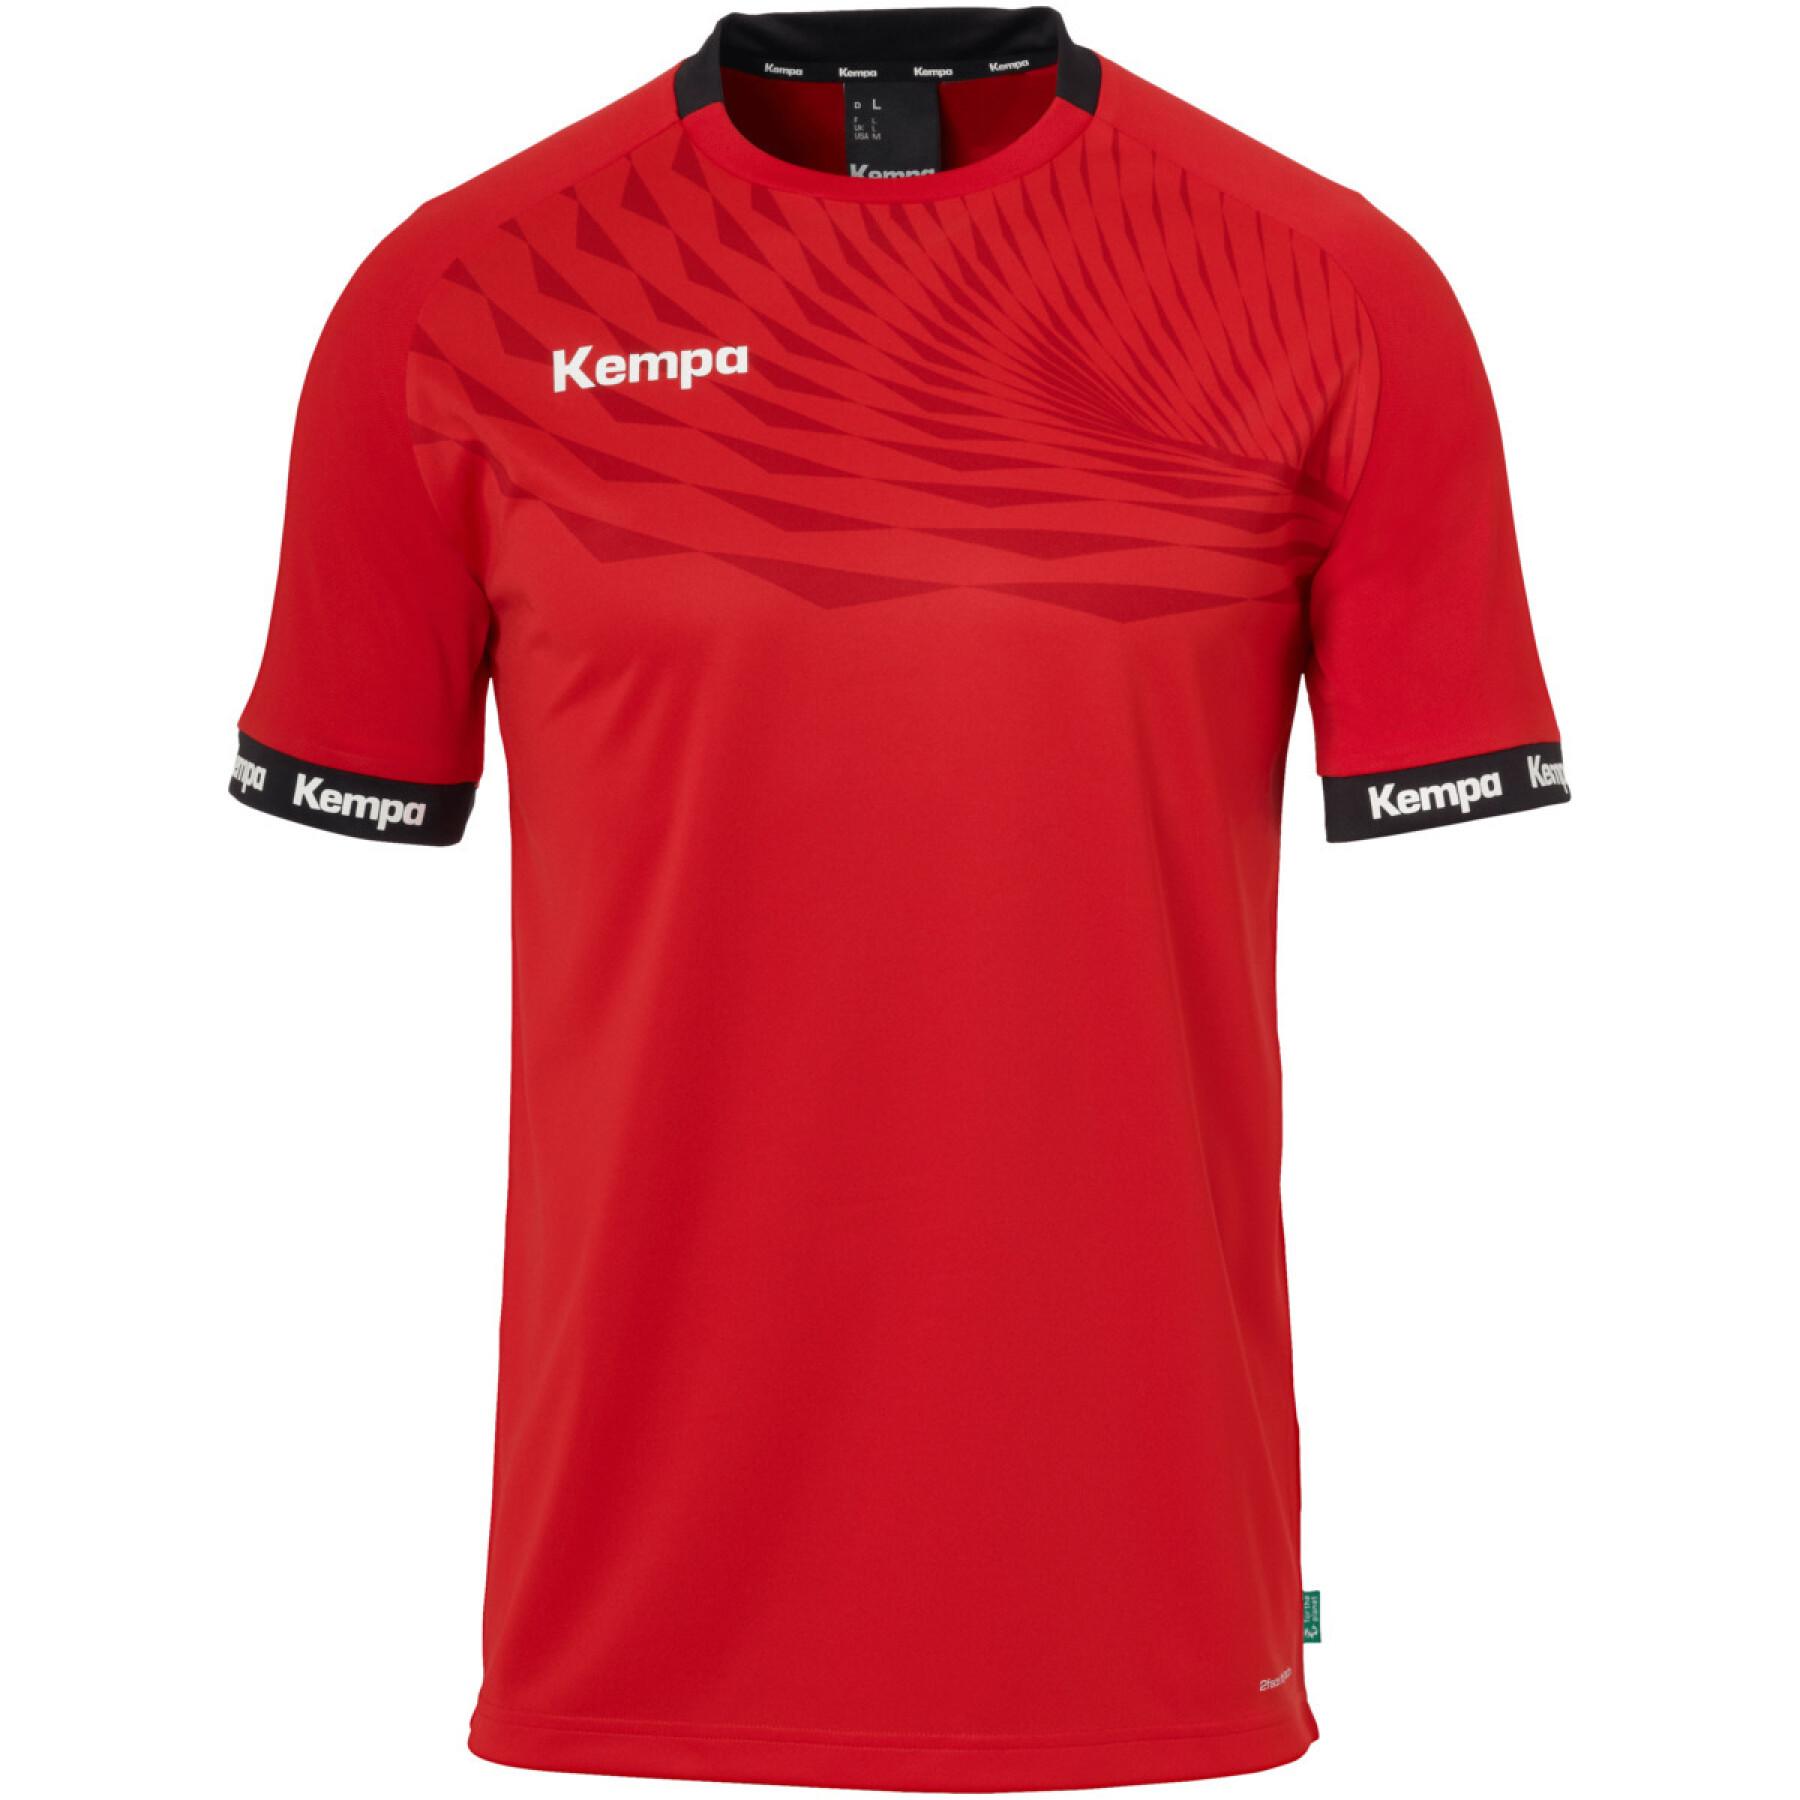 Jersey Kempa Wave 26 athletic top